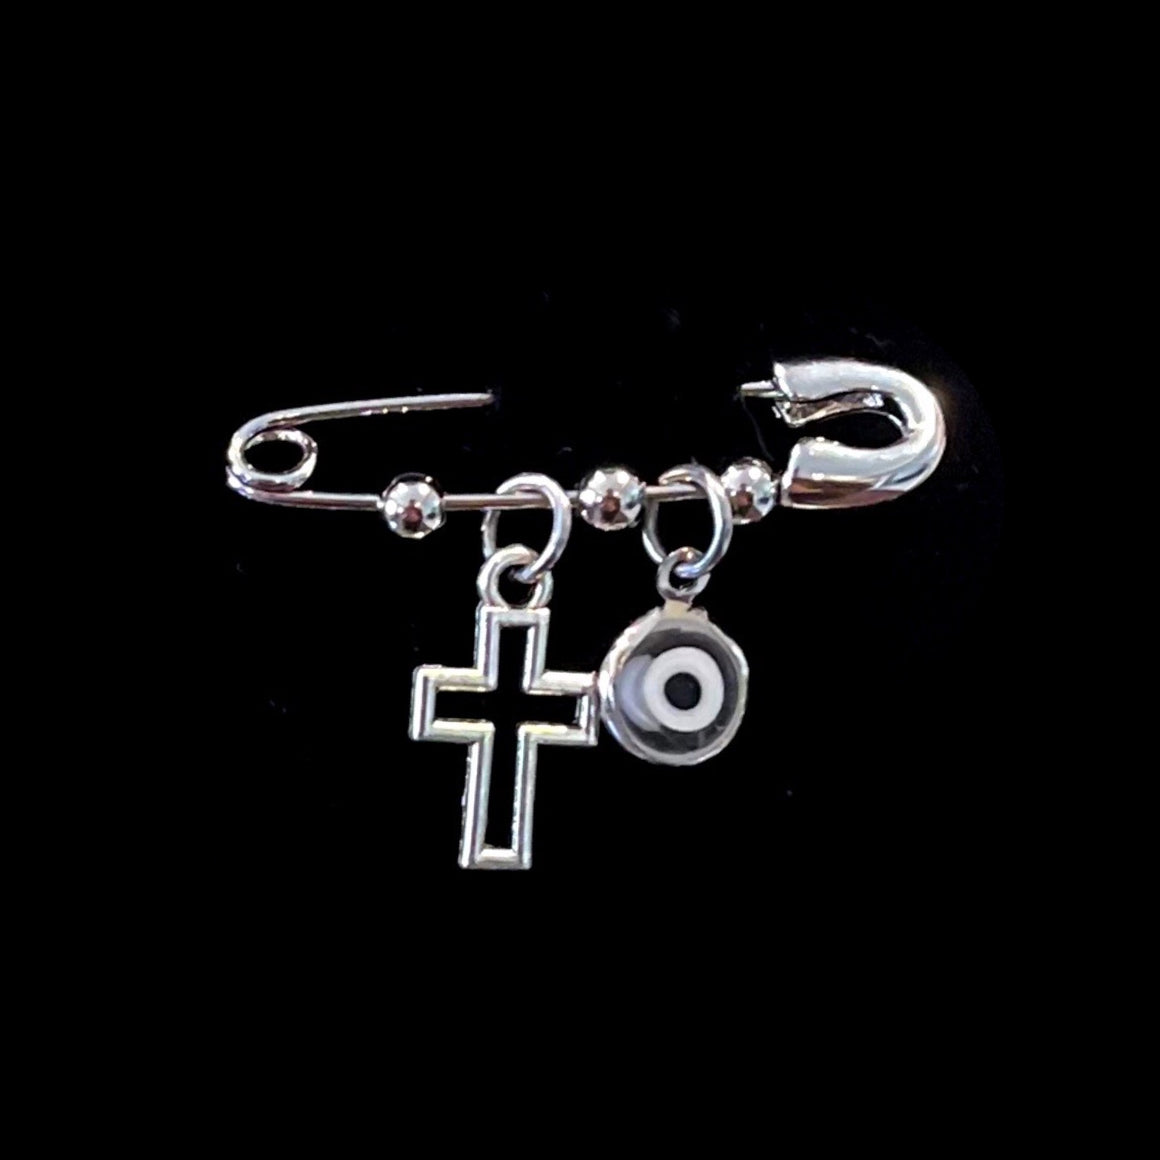 WITNESS PIN - SILVER PIN 3 BEAD + 2 CHARMS